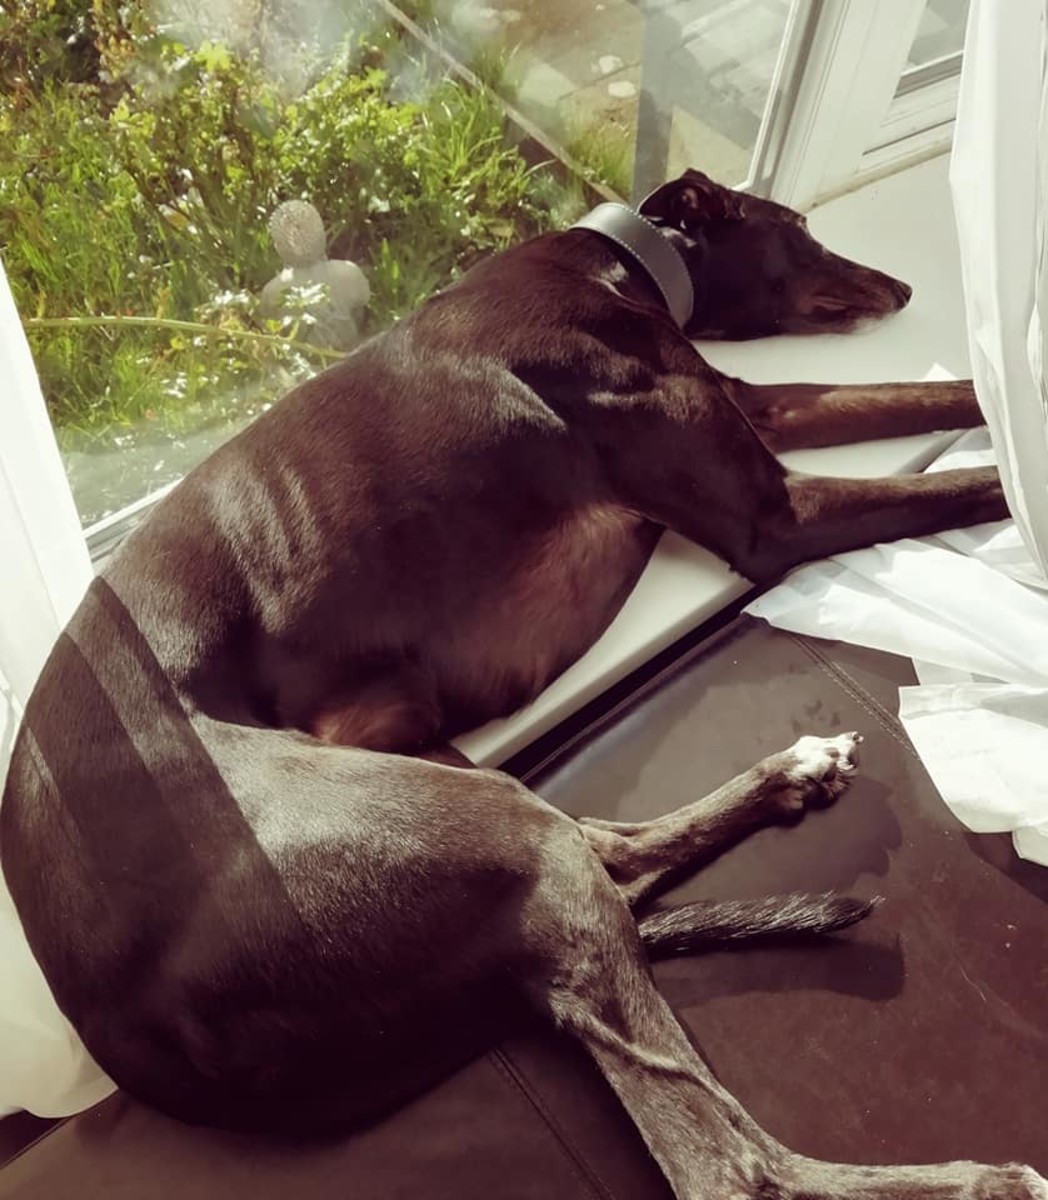 Learn how our adopted rescue greyhound loves to spread out in the sun on the window sill